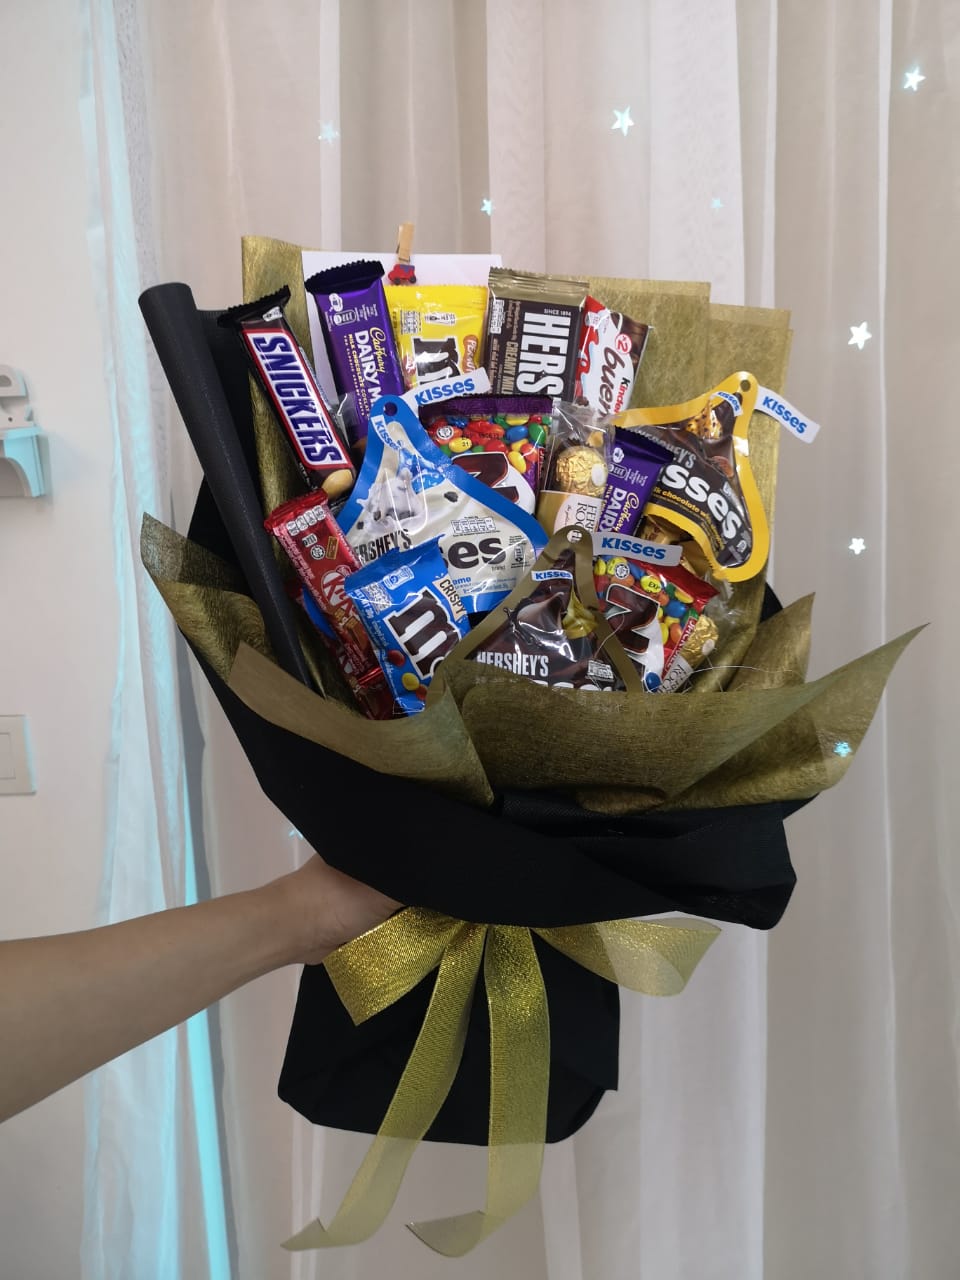 Buy Milkybar Chocolate Bouquet, Milkybar Selection Box, Nestle Chocolate  Gift Box, Gifts for Him and Her, Get Well Soon, Chocolate Bouquet Online in  India - Etsy